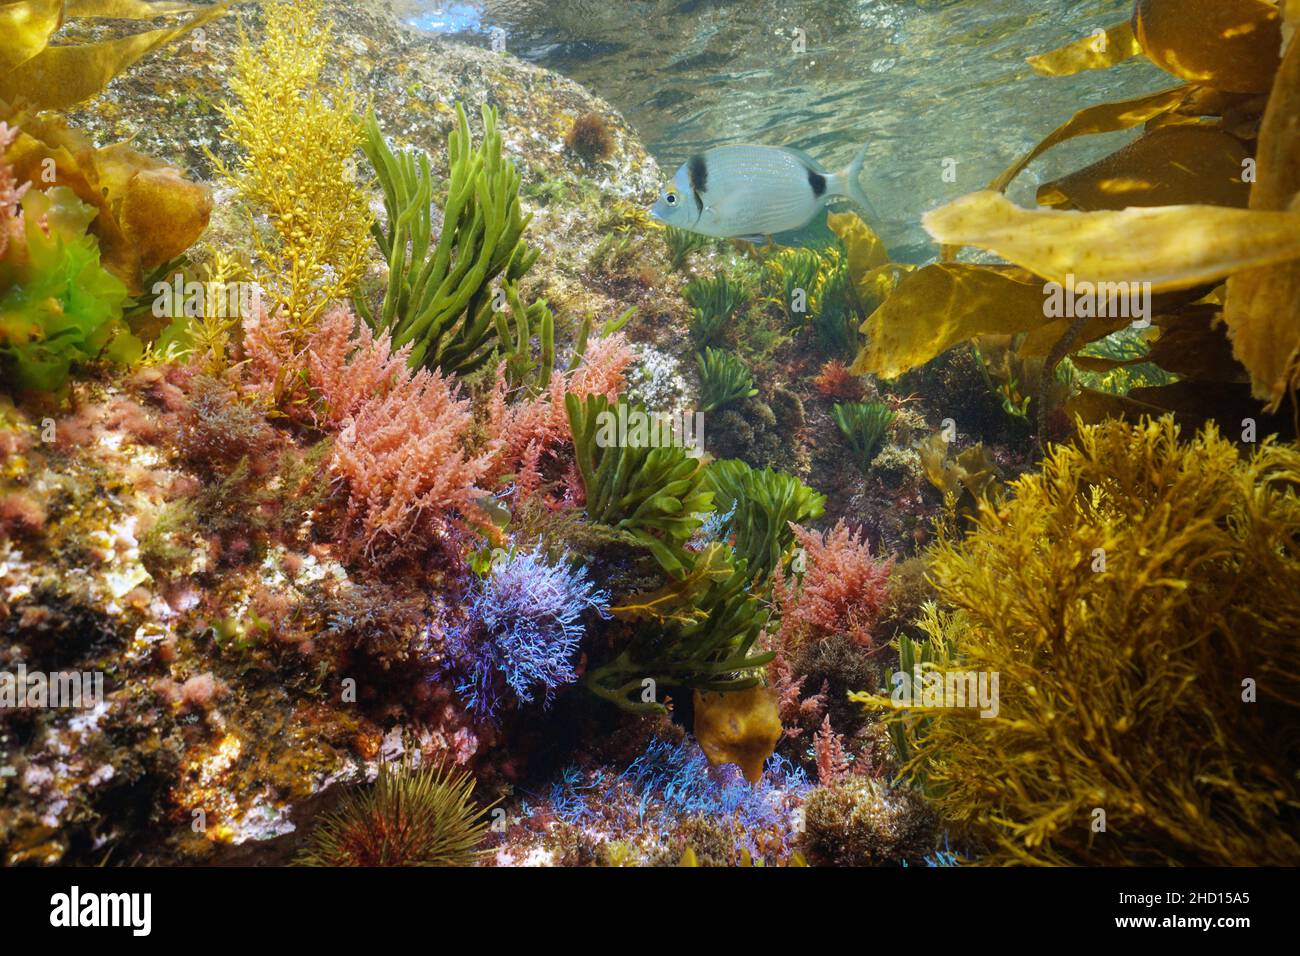 Underwater various colorful algae with a fish in the ocean in shallow water, Eastern Atlantic, Spain, Galicia Stock Photo